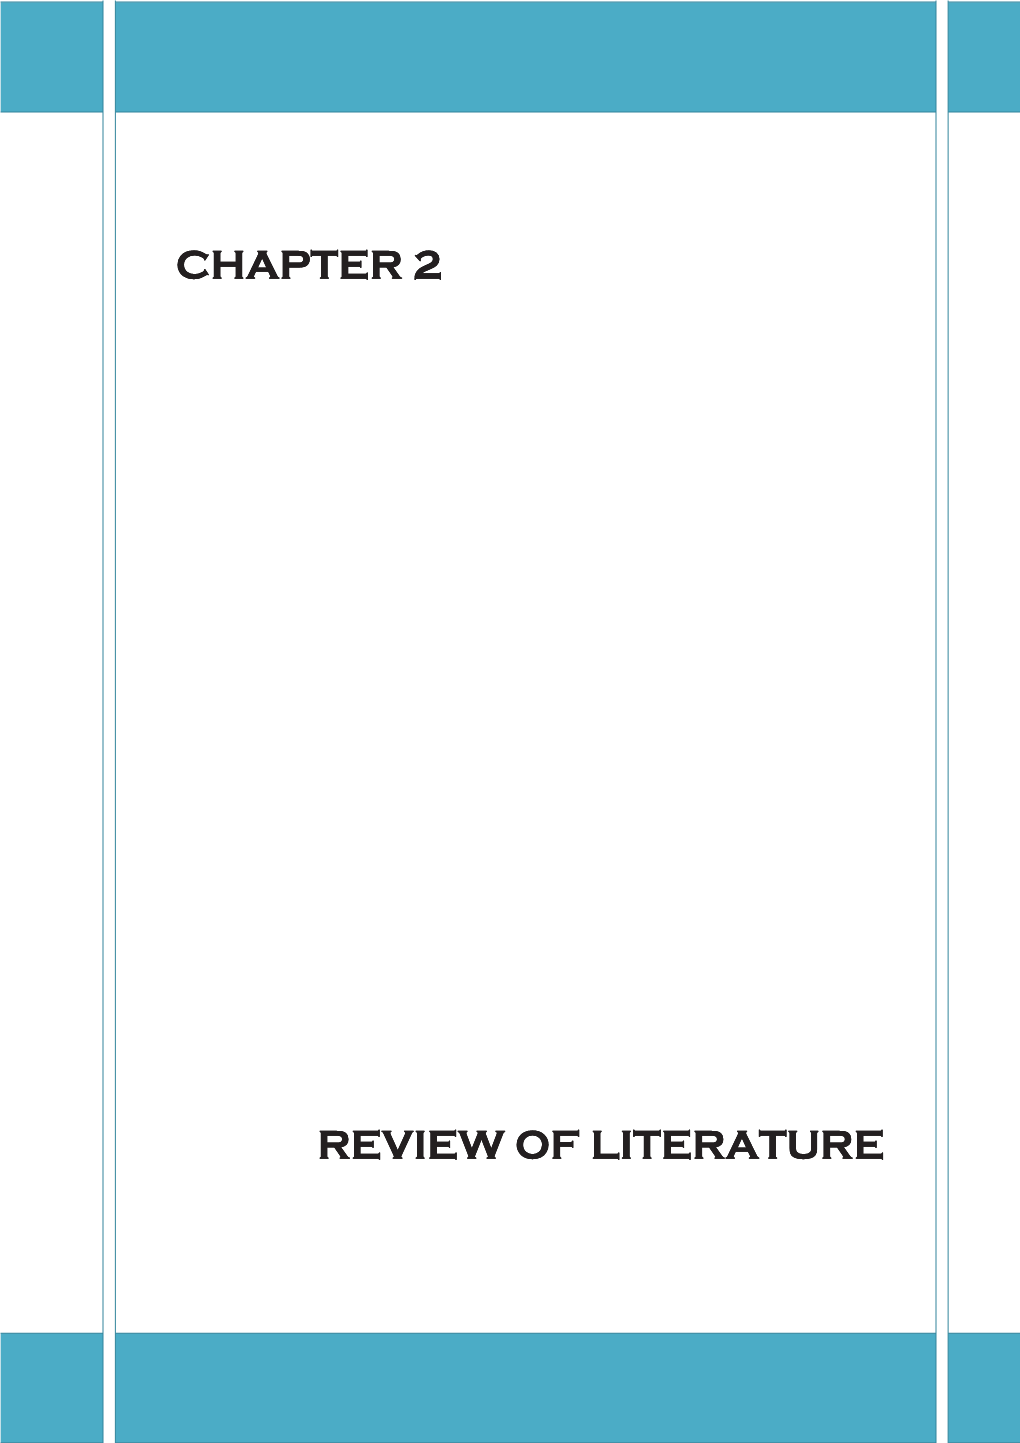 Chapter 2 Chapter 2 Review of Literature Review of Literature